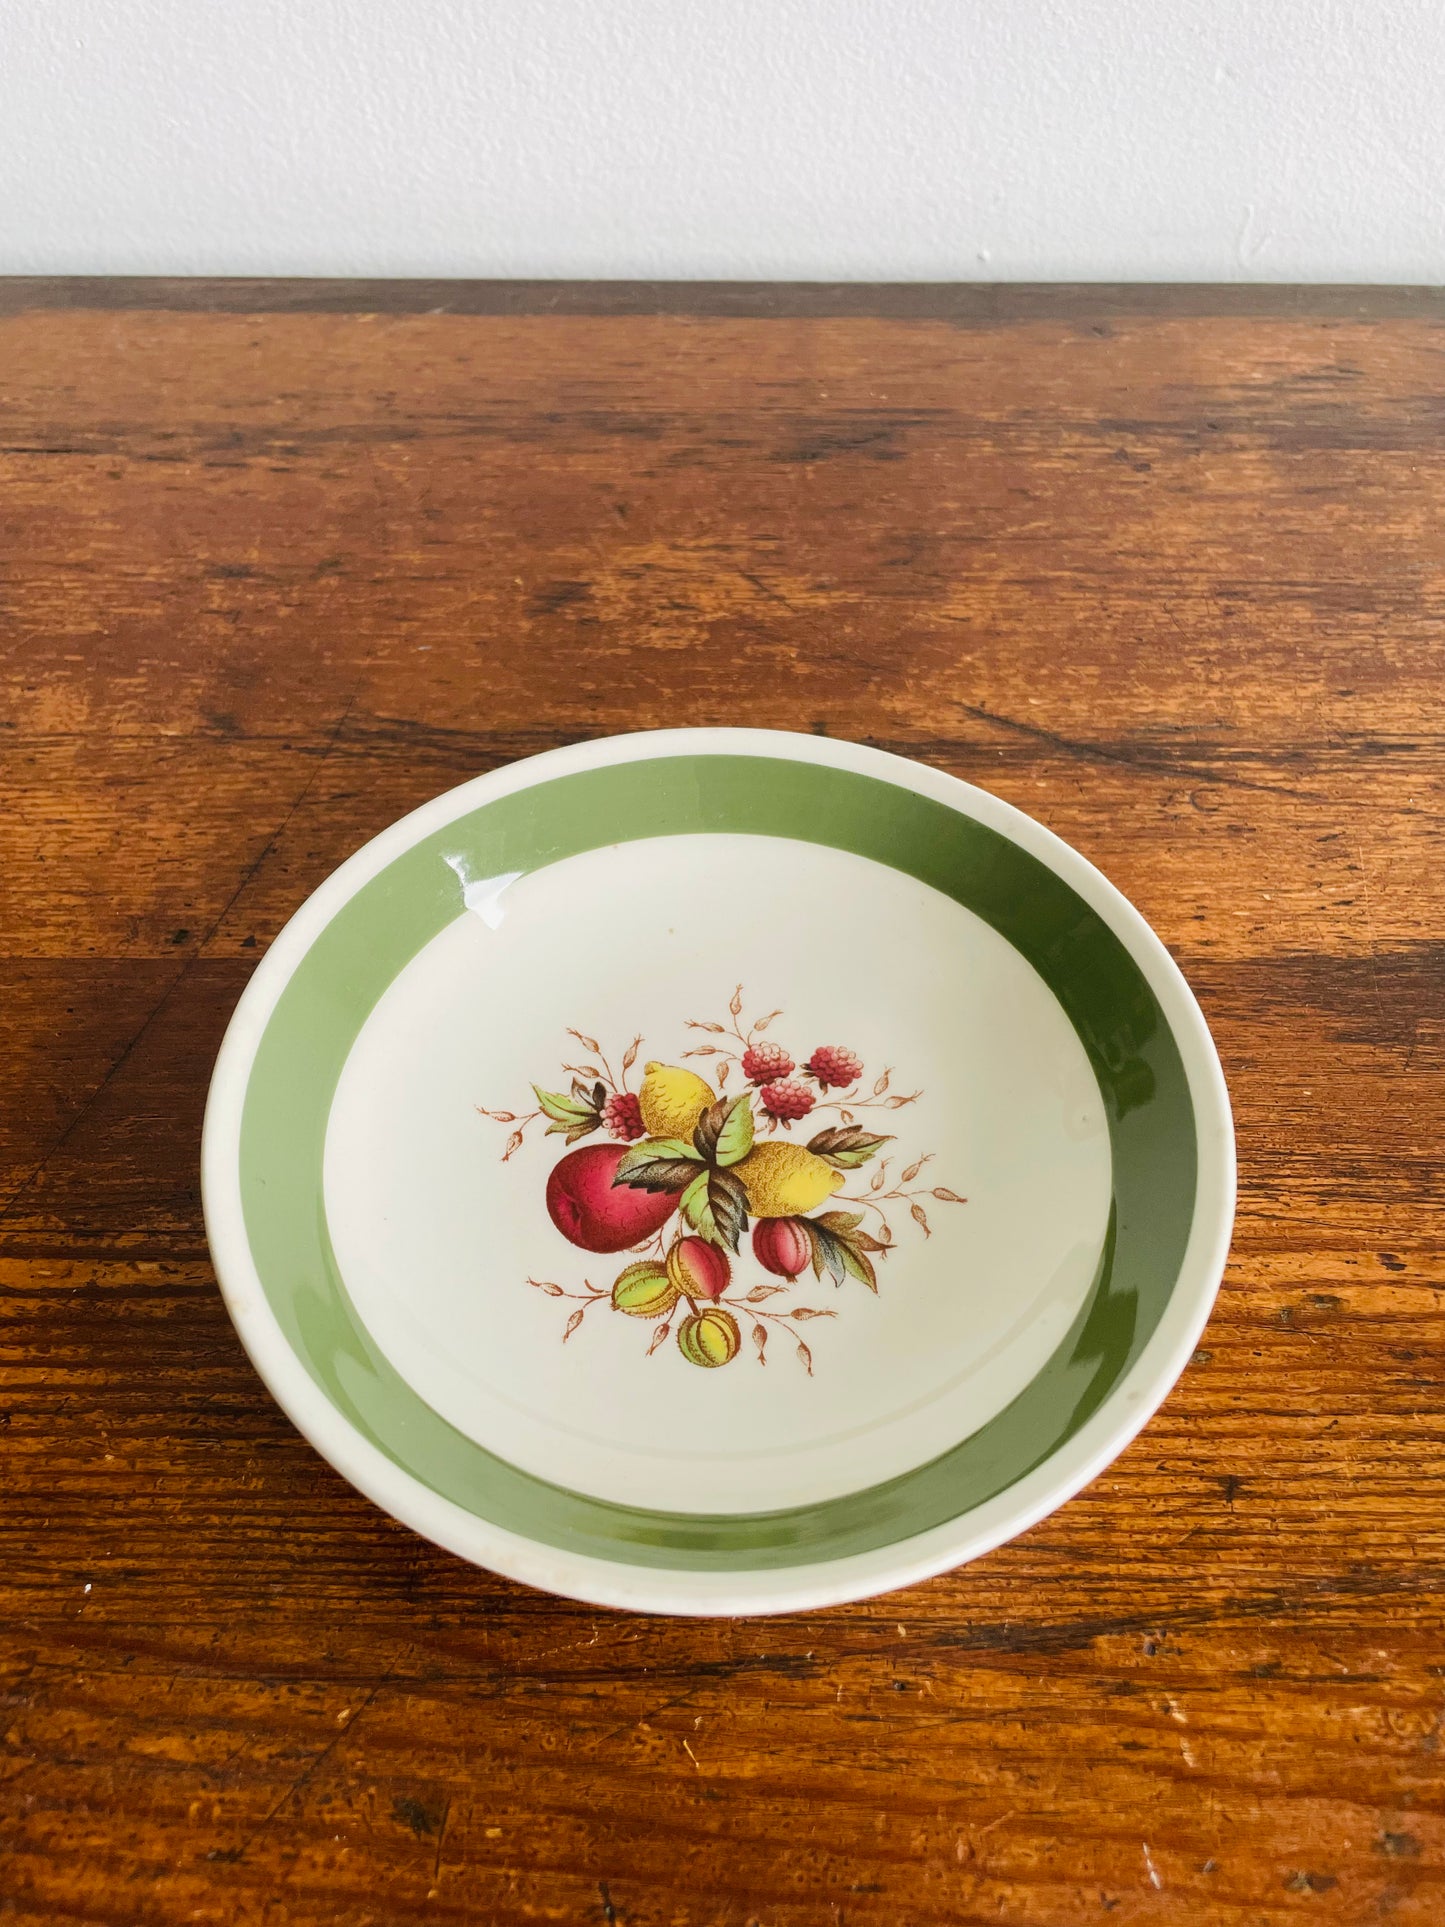 Crown Ducal Norvic Citrus Pattern Shallow Bowl Trinket Dish with Fruit Design - Made in England